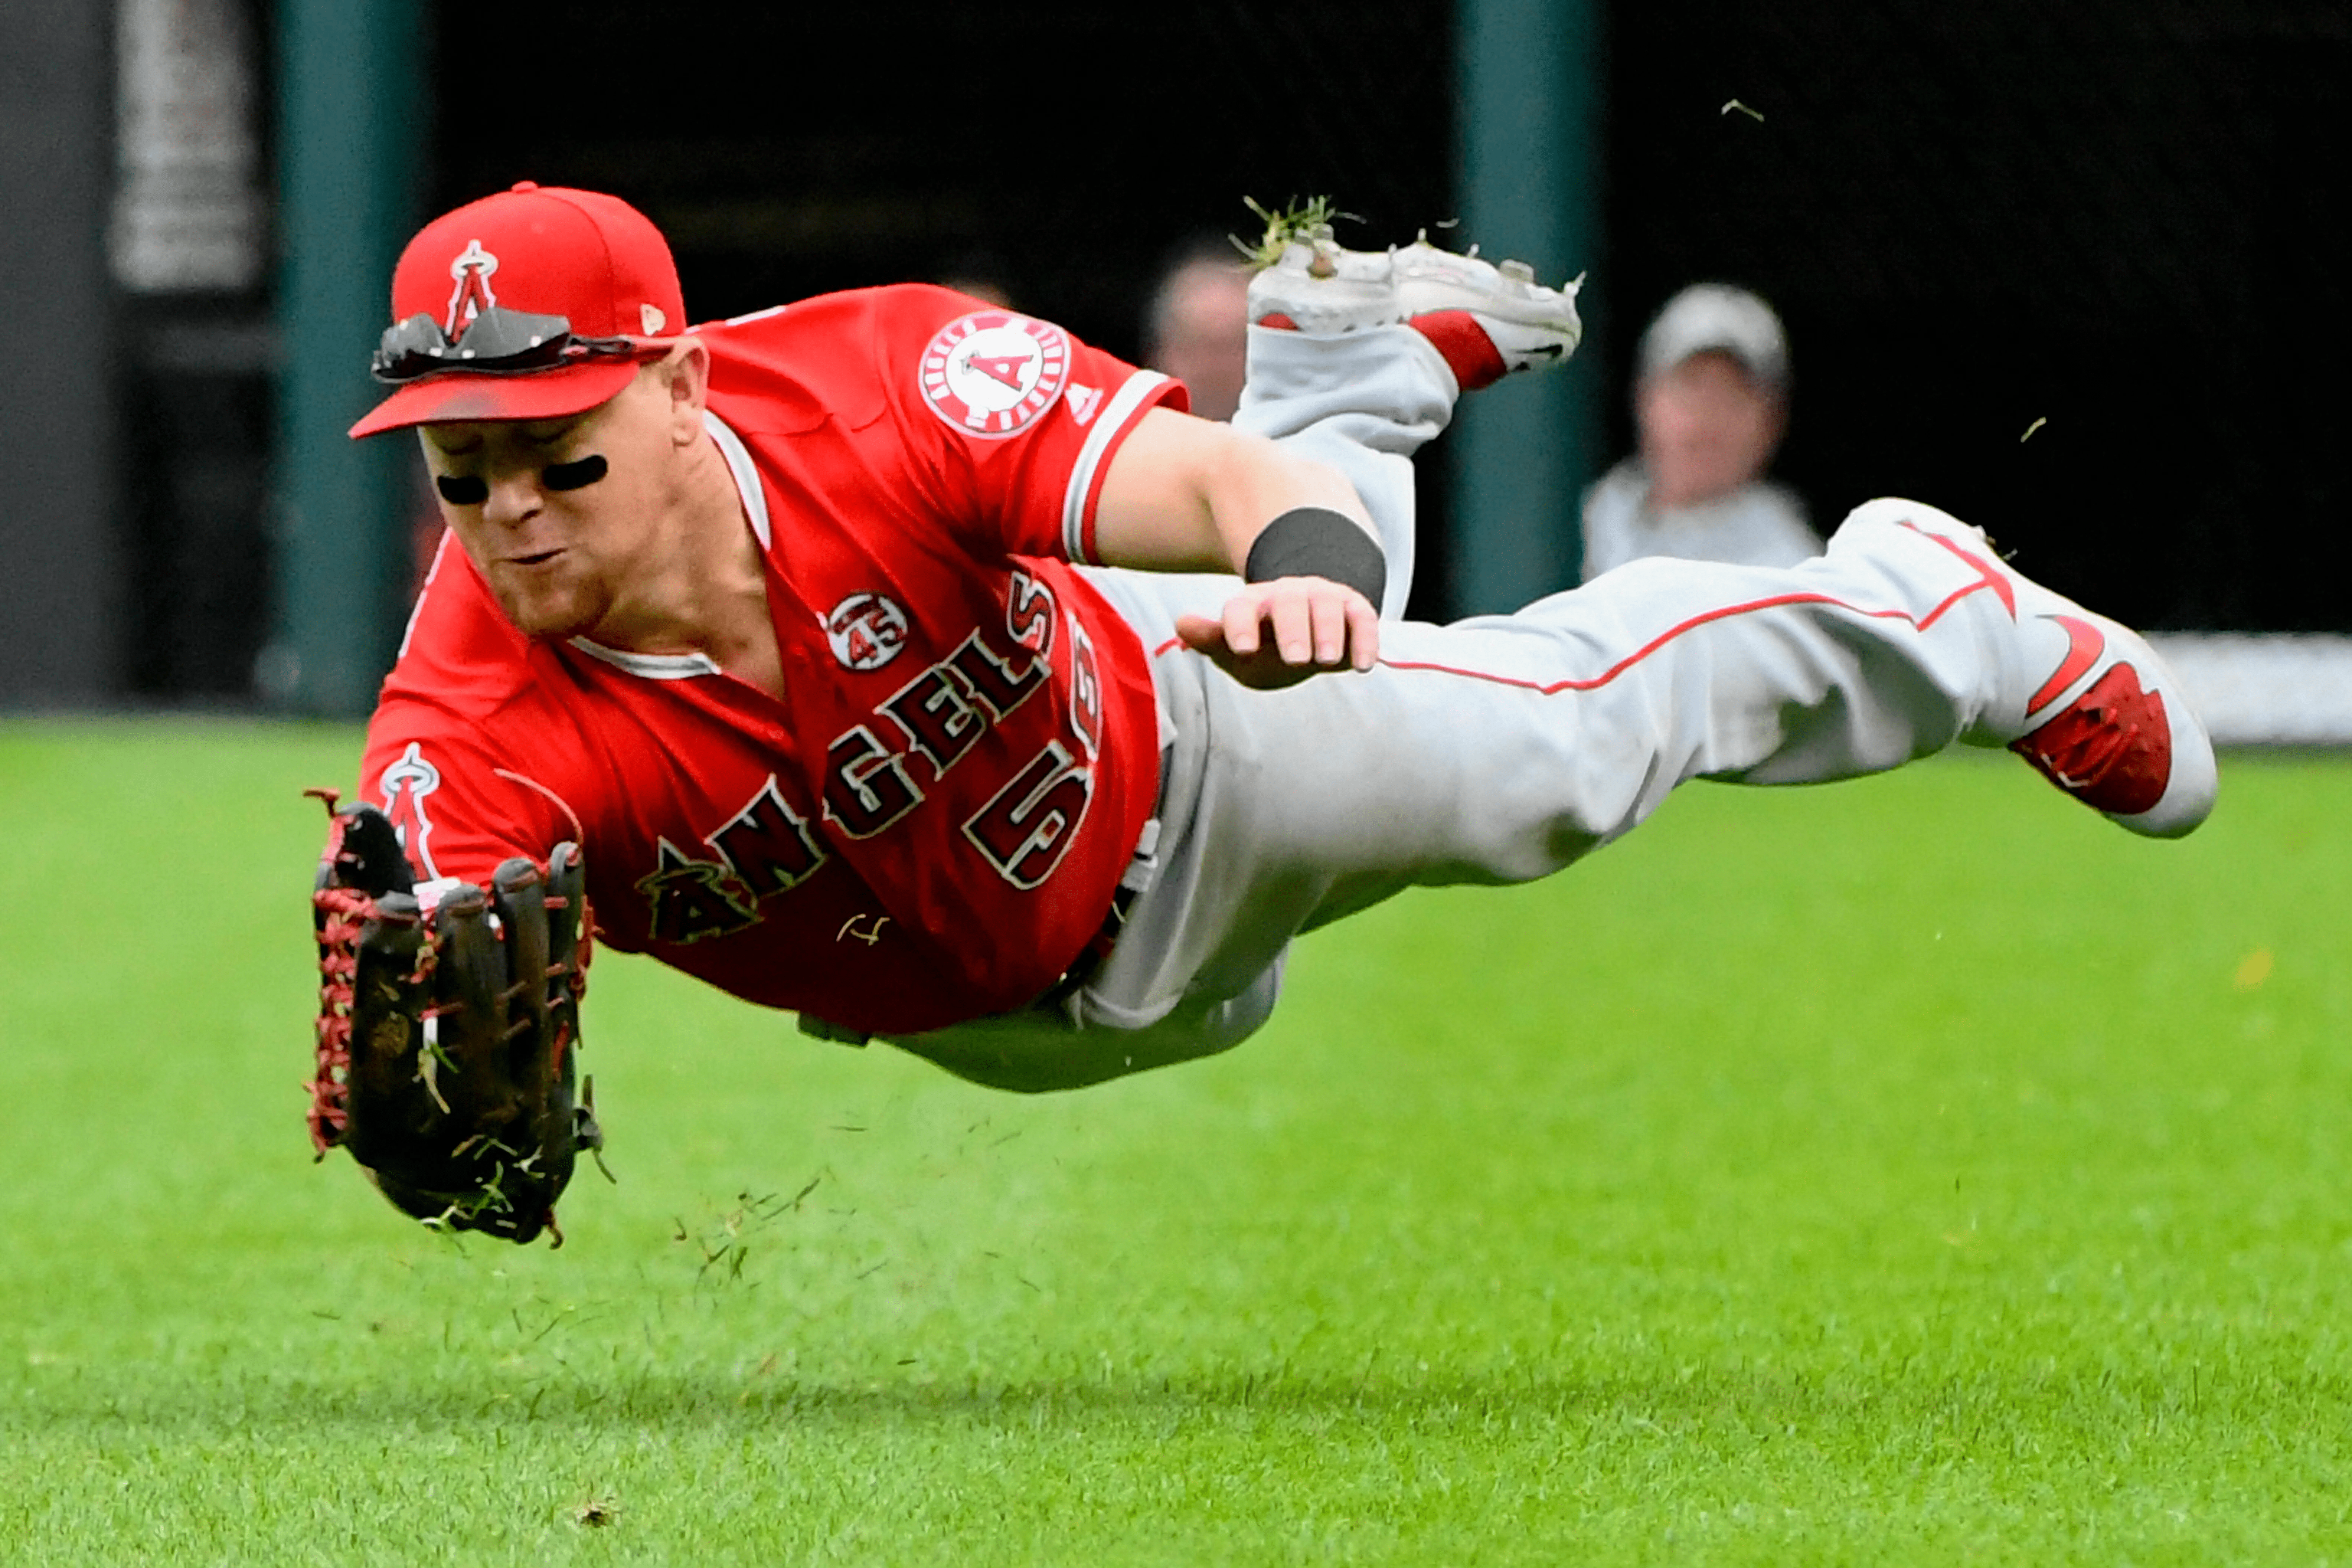 Kole Calhoun's injury will keep him out of Rangers' lineup for longer than  expected